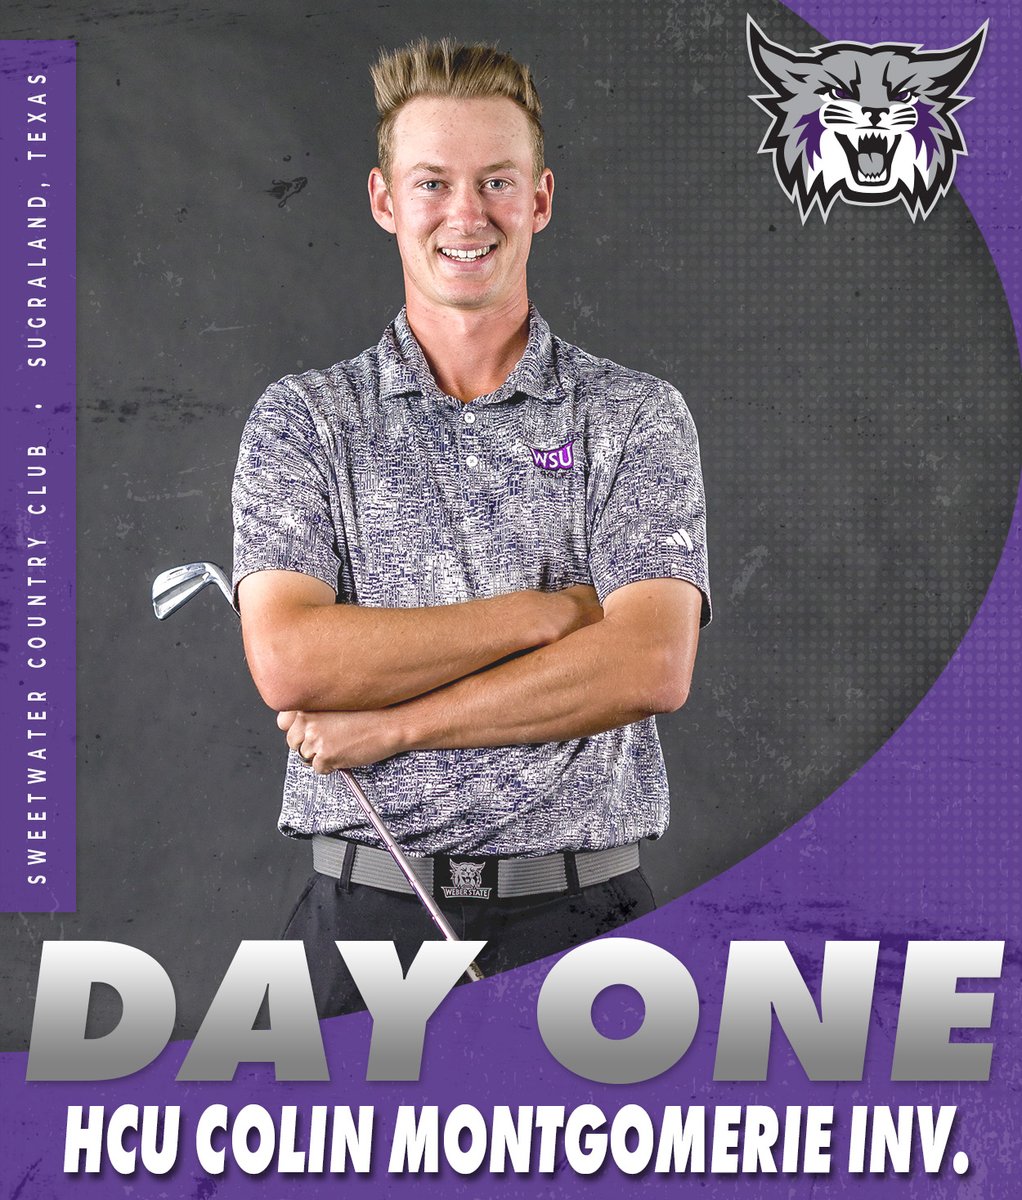 The Wildcats are on the course at Sweetwater Country Club for the opening round of the Colin Montgomerie Invitational. 36 holes are on tap for today. Follow along with live scoring at bit.ly/3IkNo1U